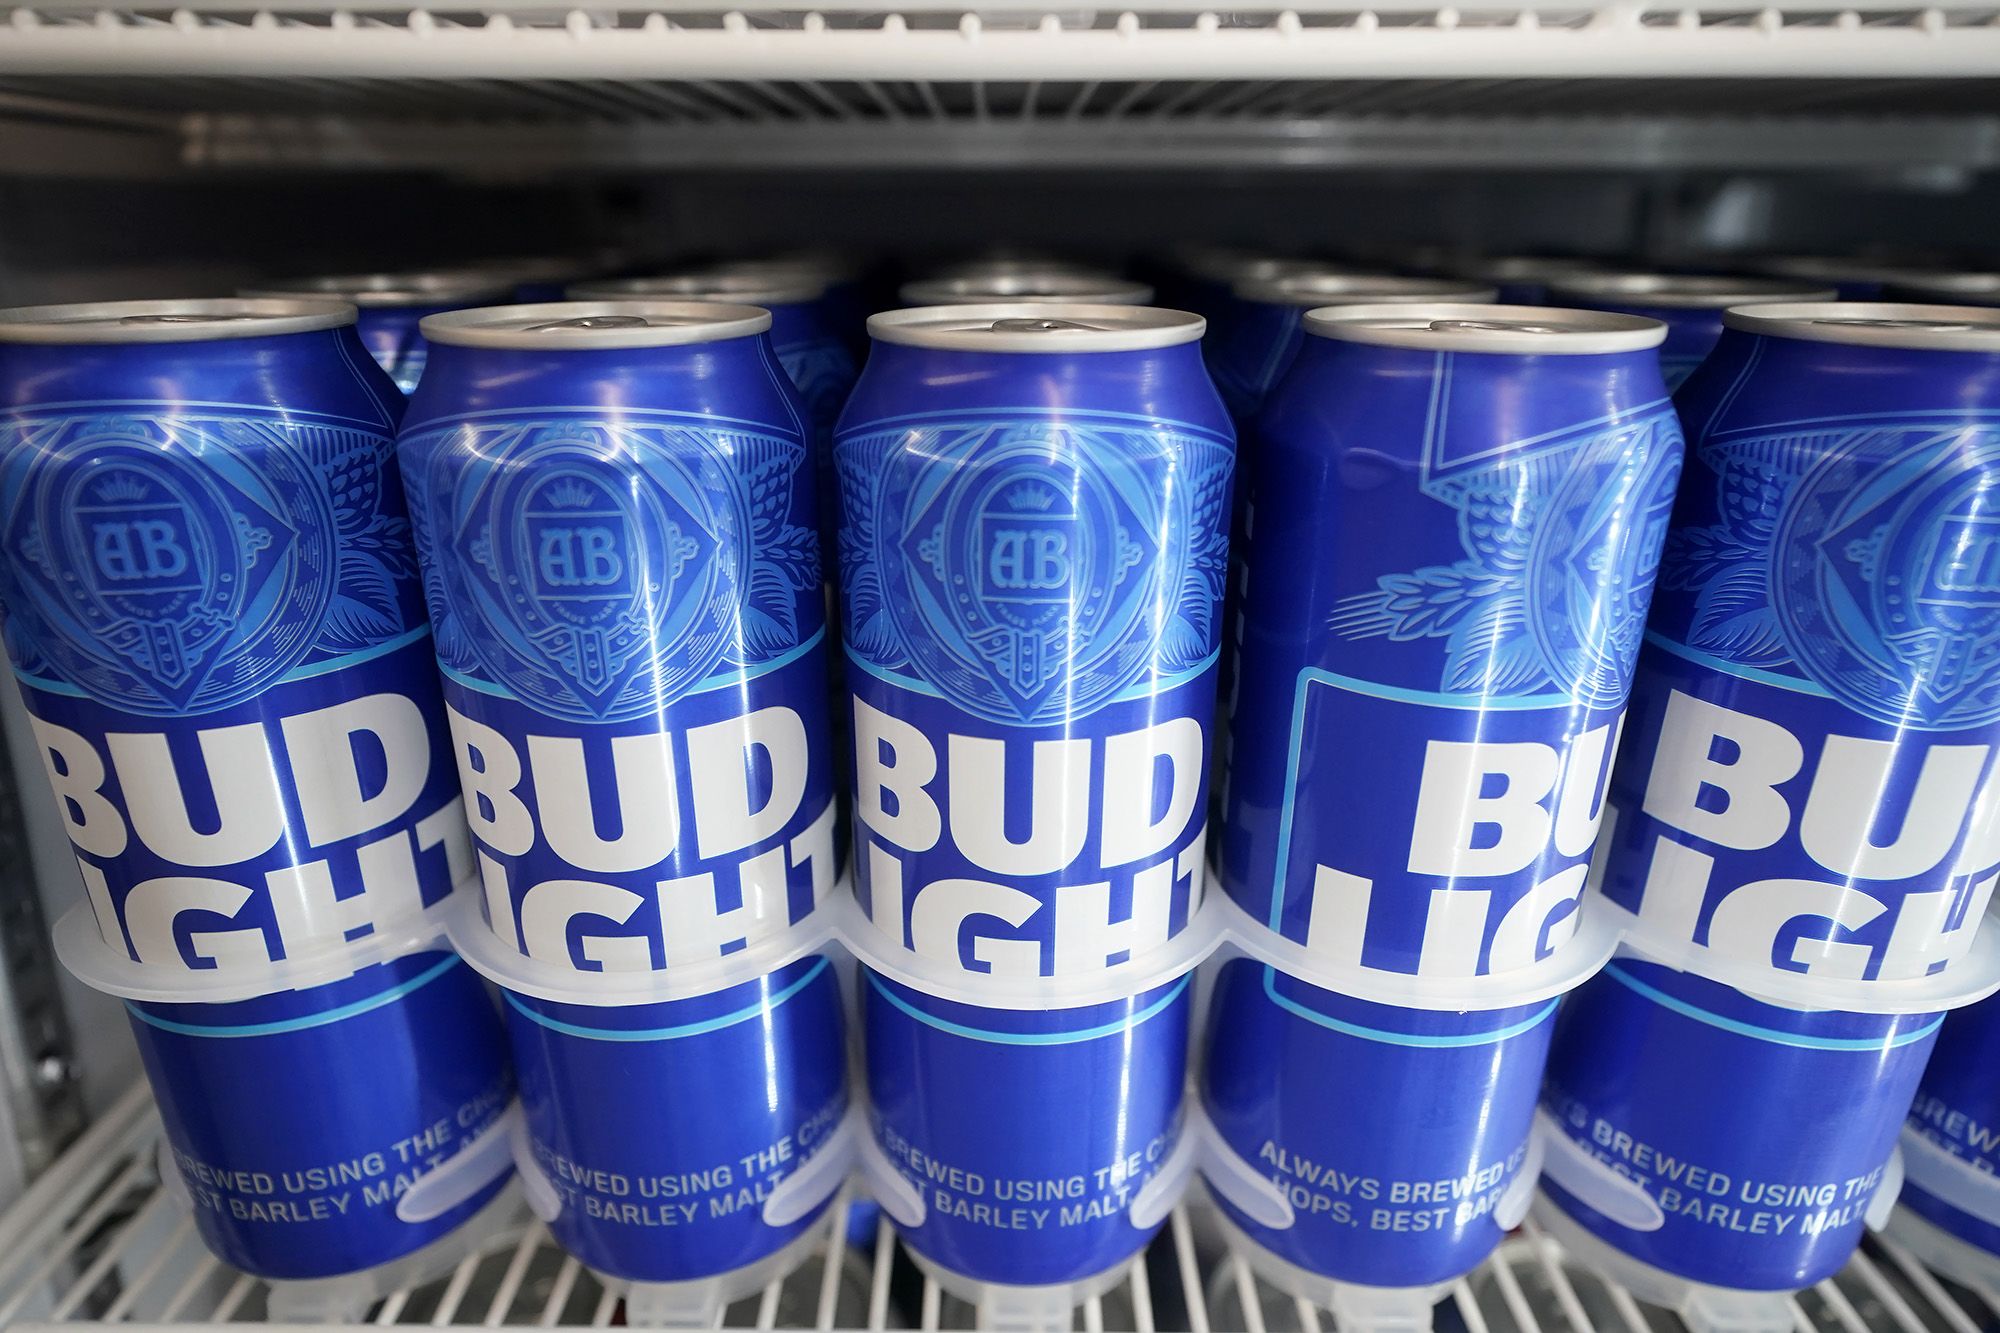 Bud Light loses its title as America's top-selling beer to Modelo